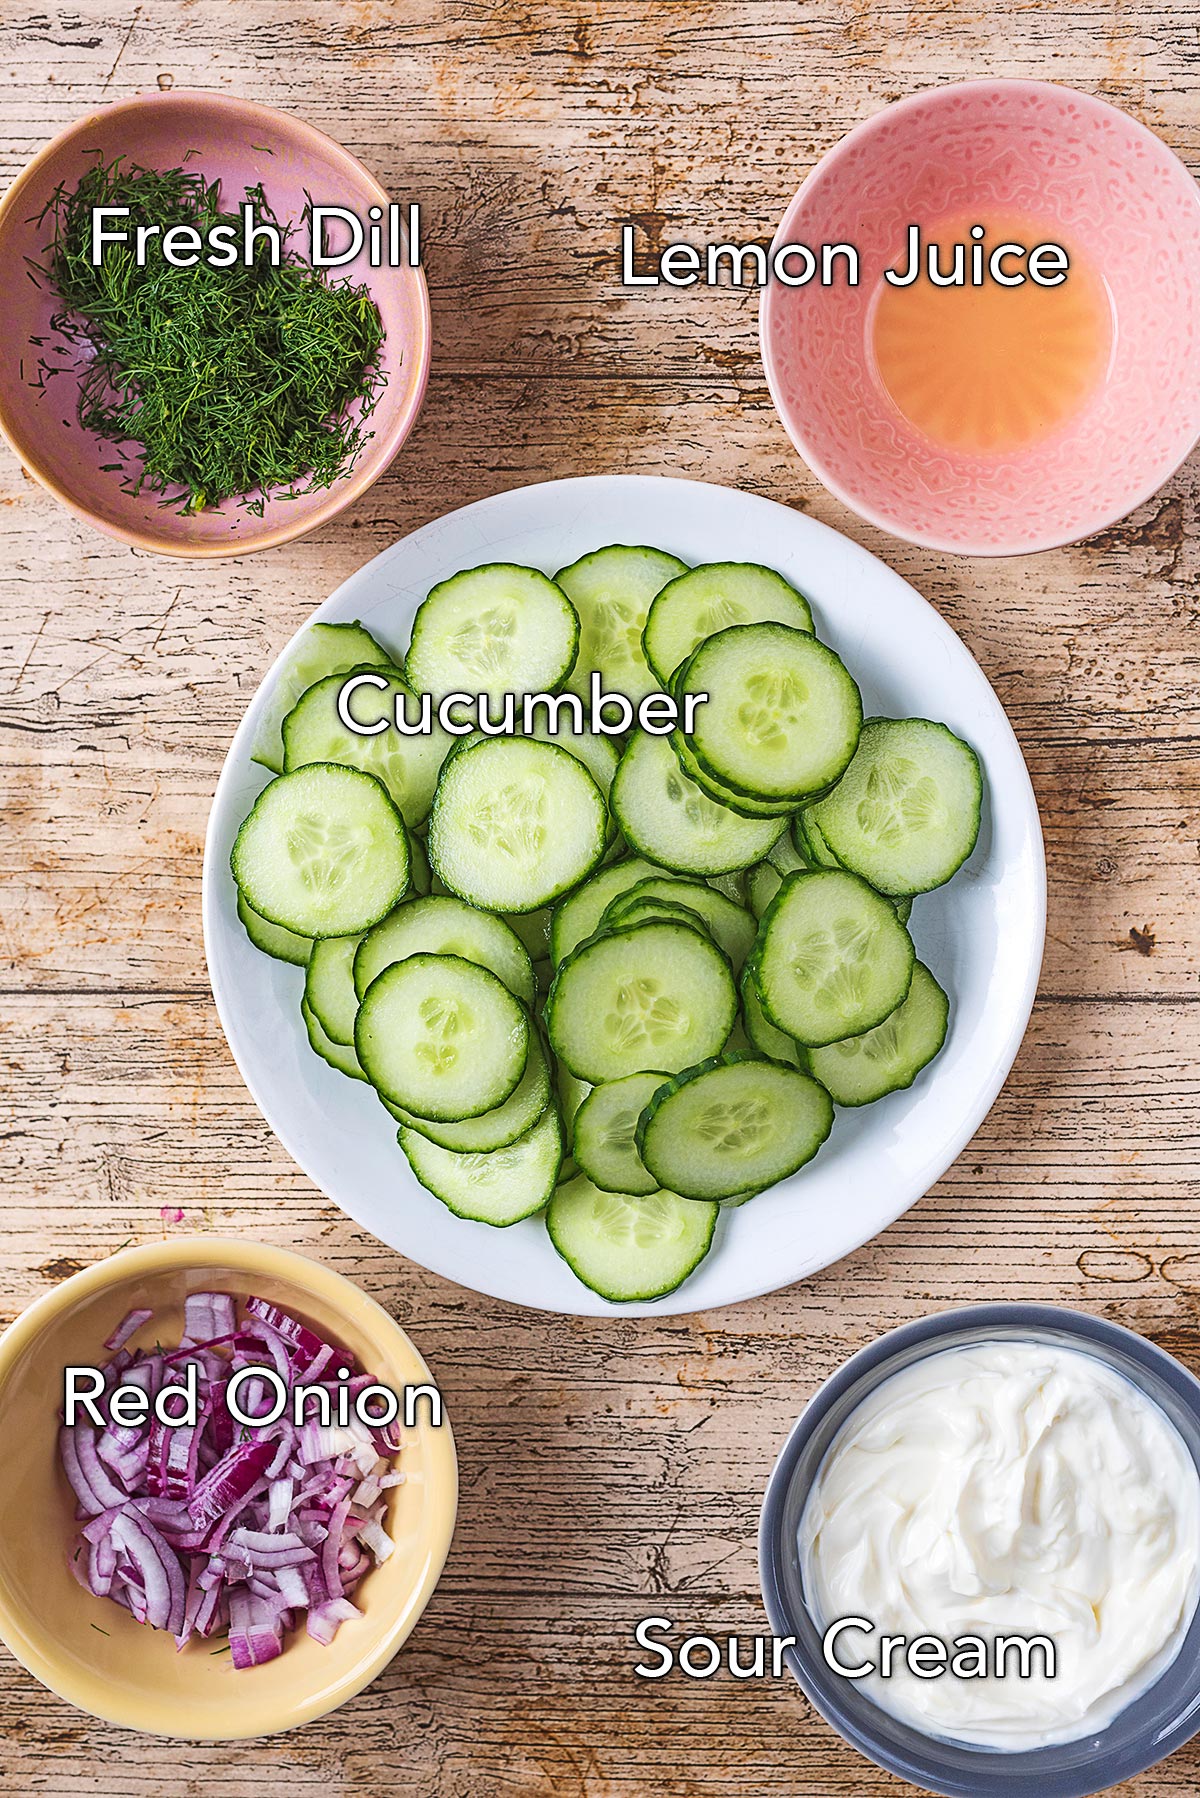 A bowl of sliced cucumber surrounded by bowls of dill, lemon juice, chopped onion and sour cream.